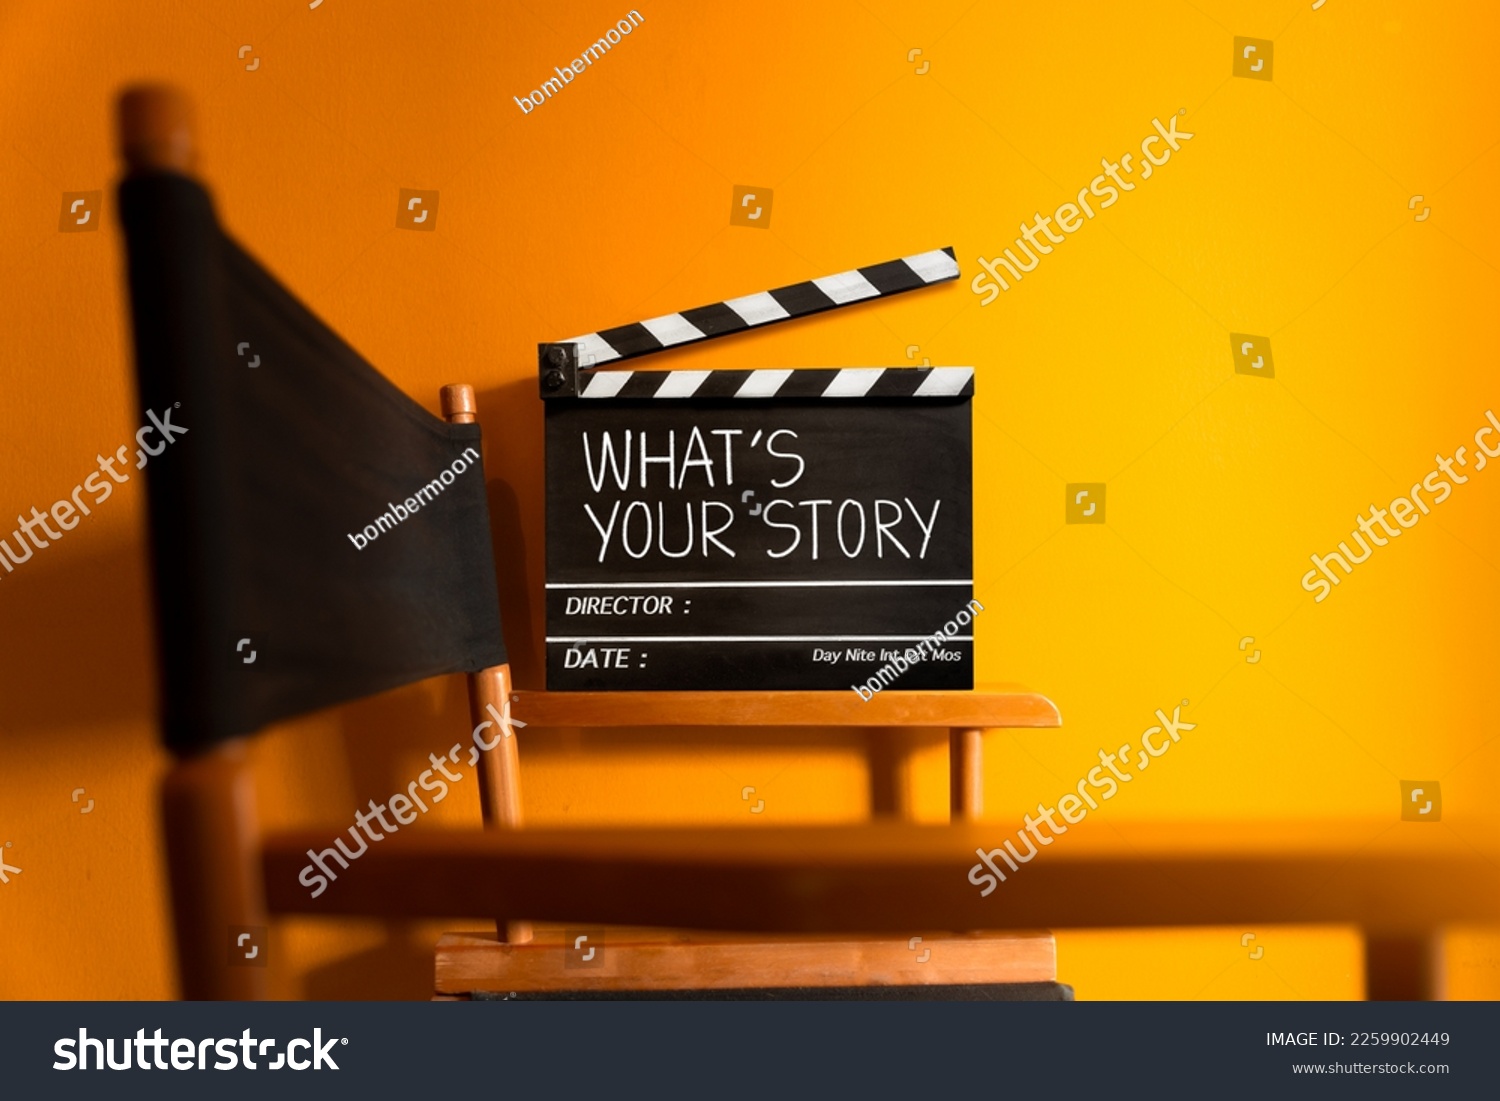 What's your story.text title on movie clapper board and director chair.
 #2259902449